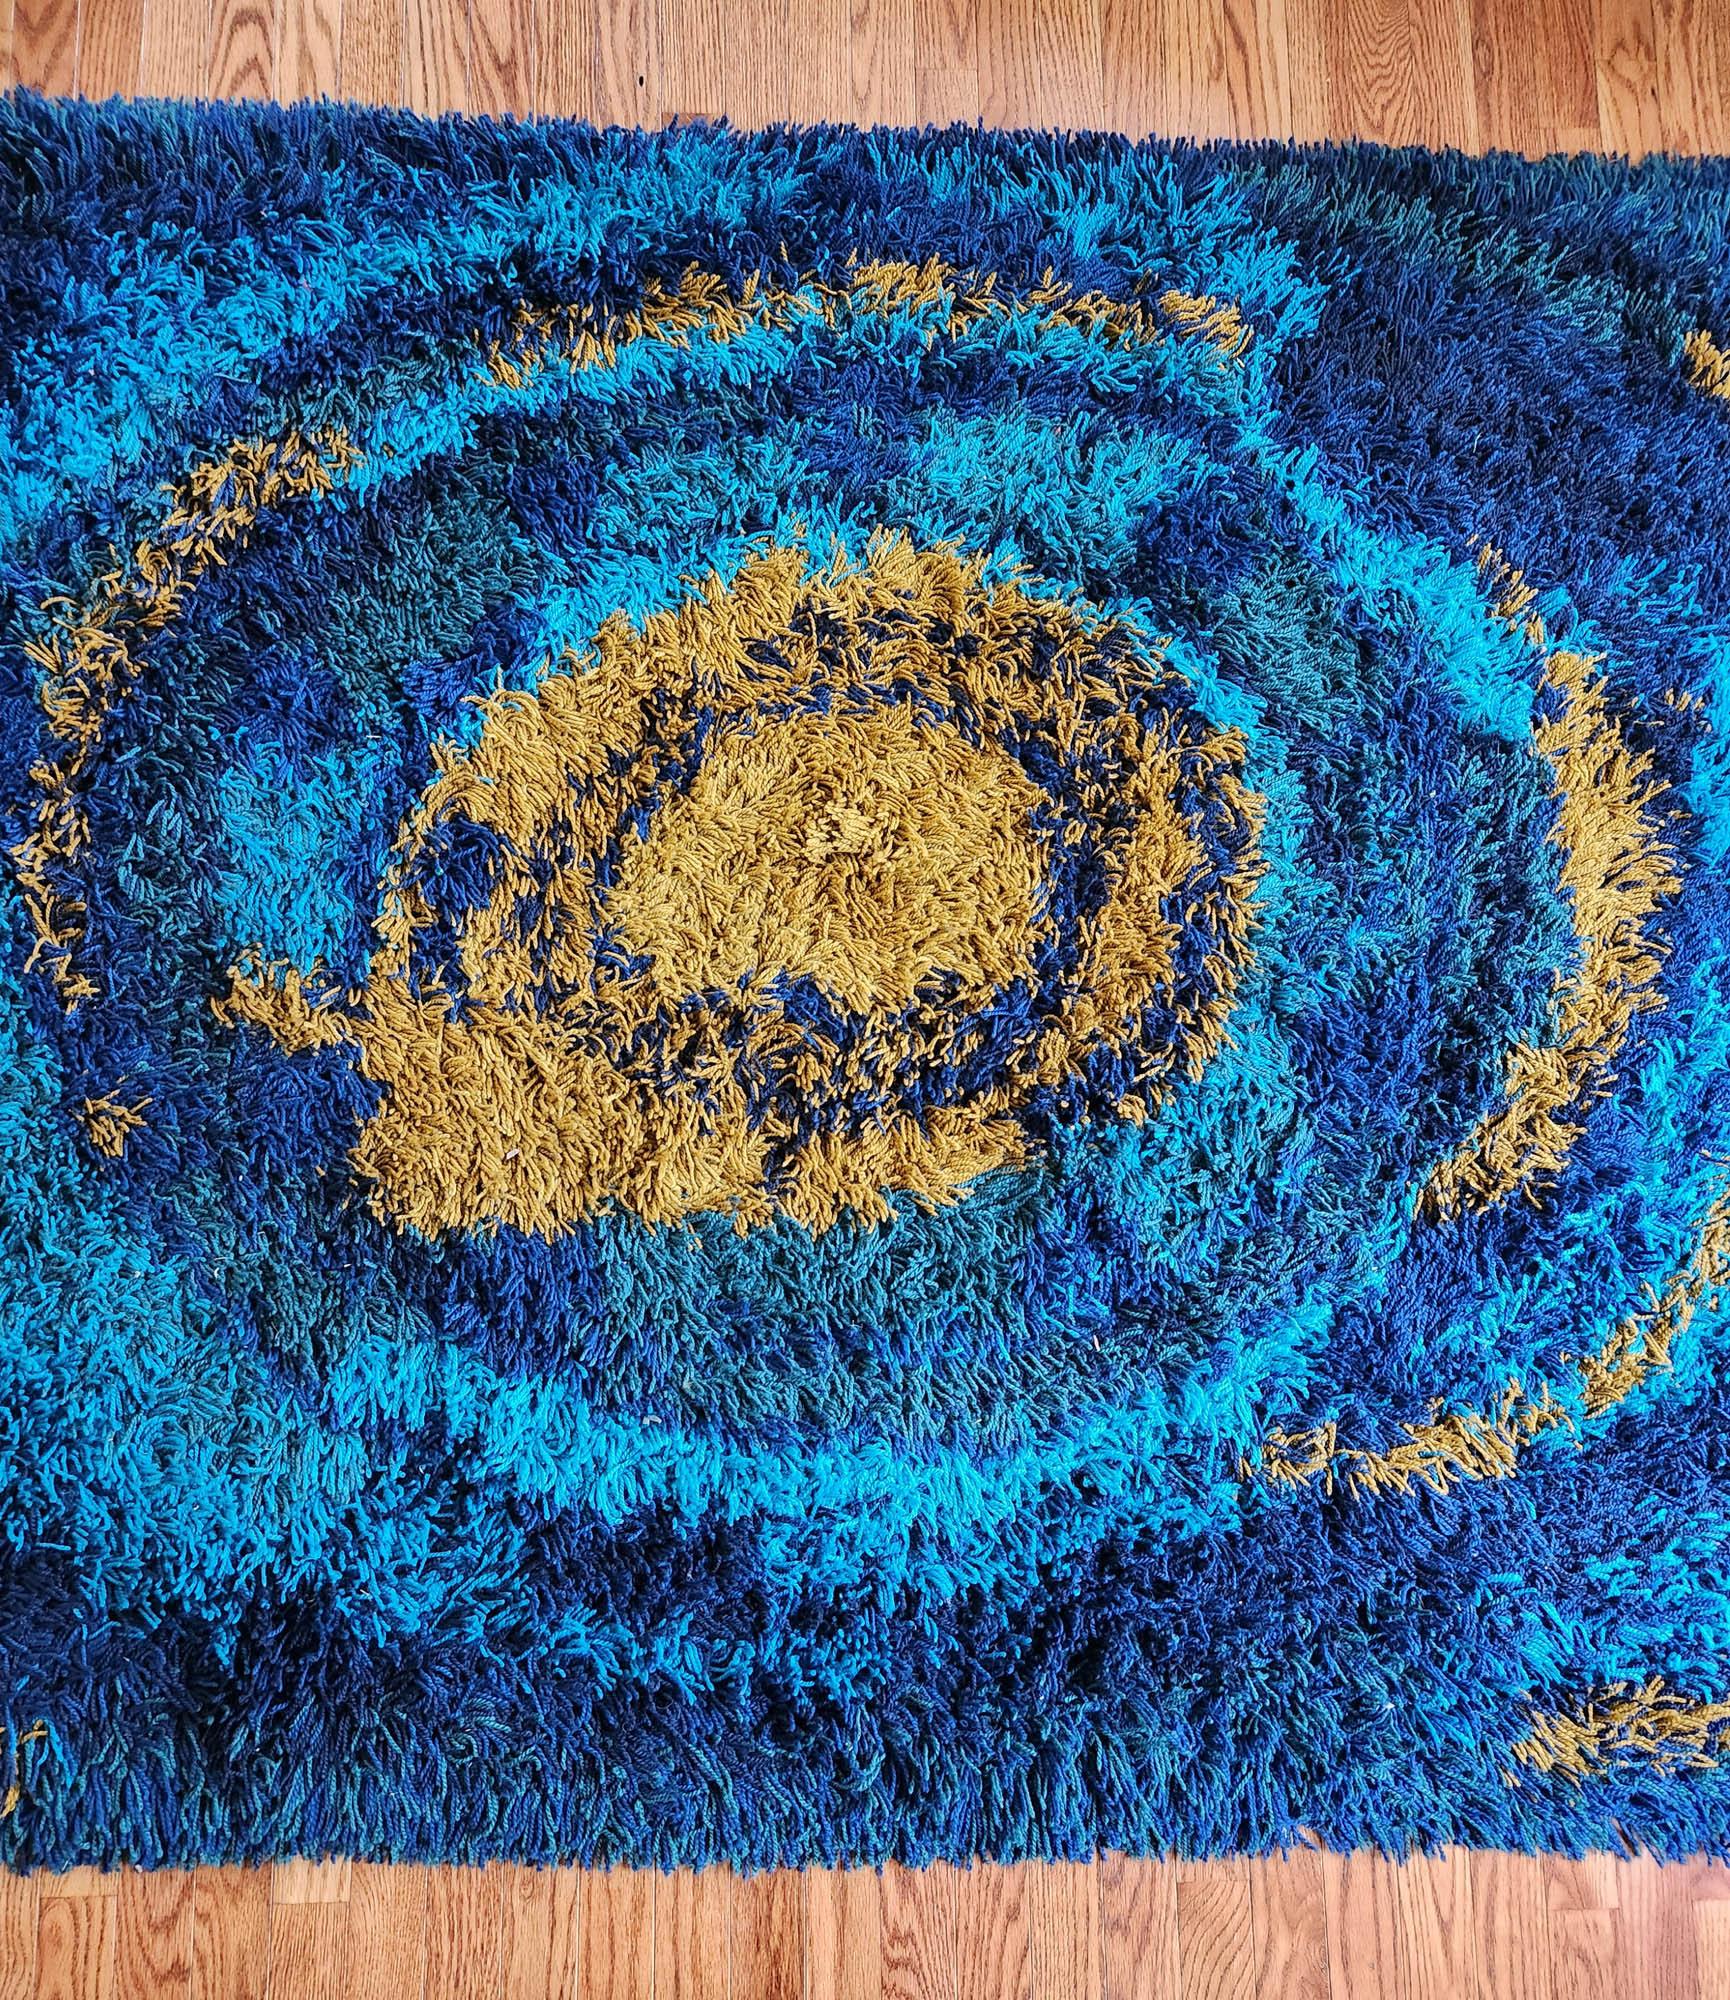 Ege Tæpper Sun Burst Rug,
Ege Rya,
Late 1960s-early 1970s

The Ege Tæpper wool rug is a wonderful example of this iconic Scandinavian Modern Rug design. The rug has a strong blue ground with a central sun and waves of blue and yellow radiating